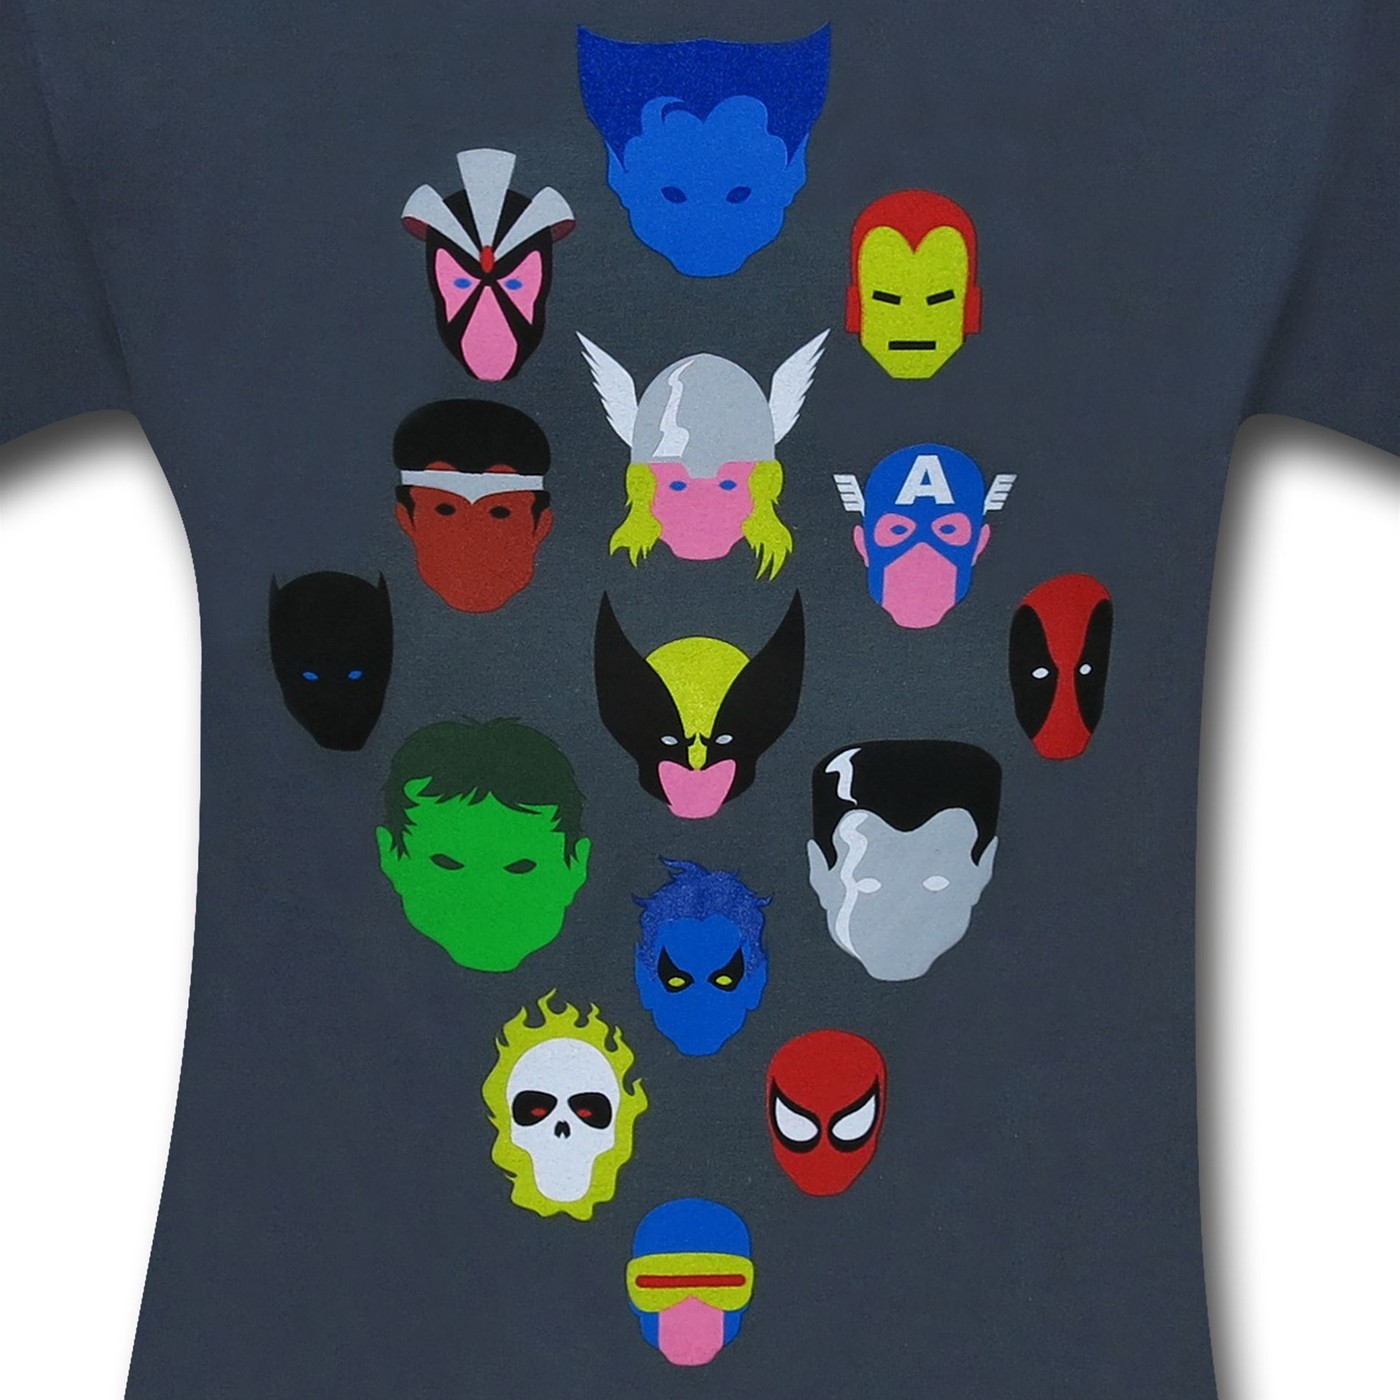 Marvel Character Heads Charcoal T-Shirt